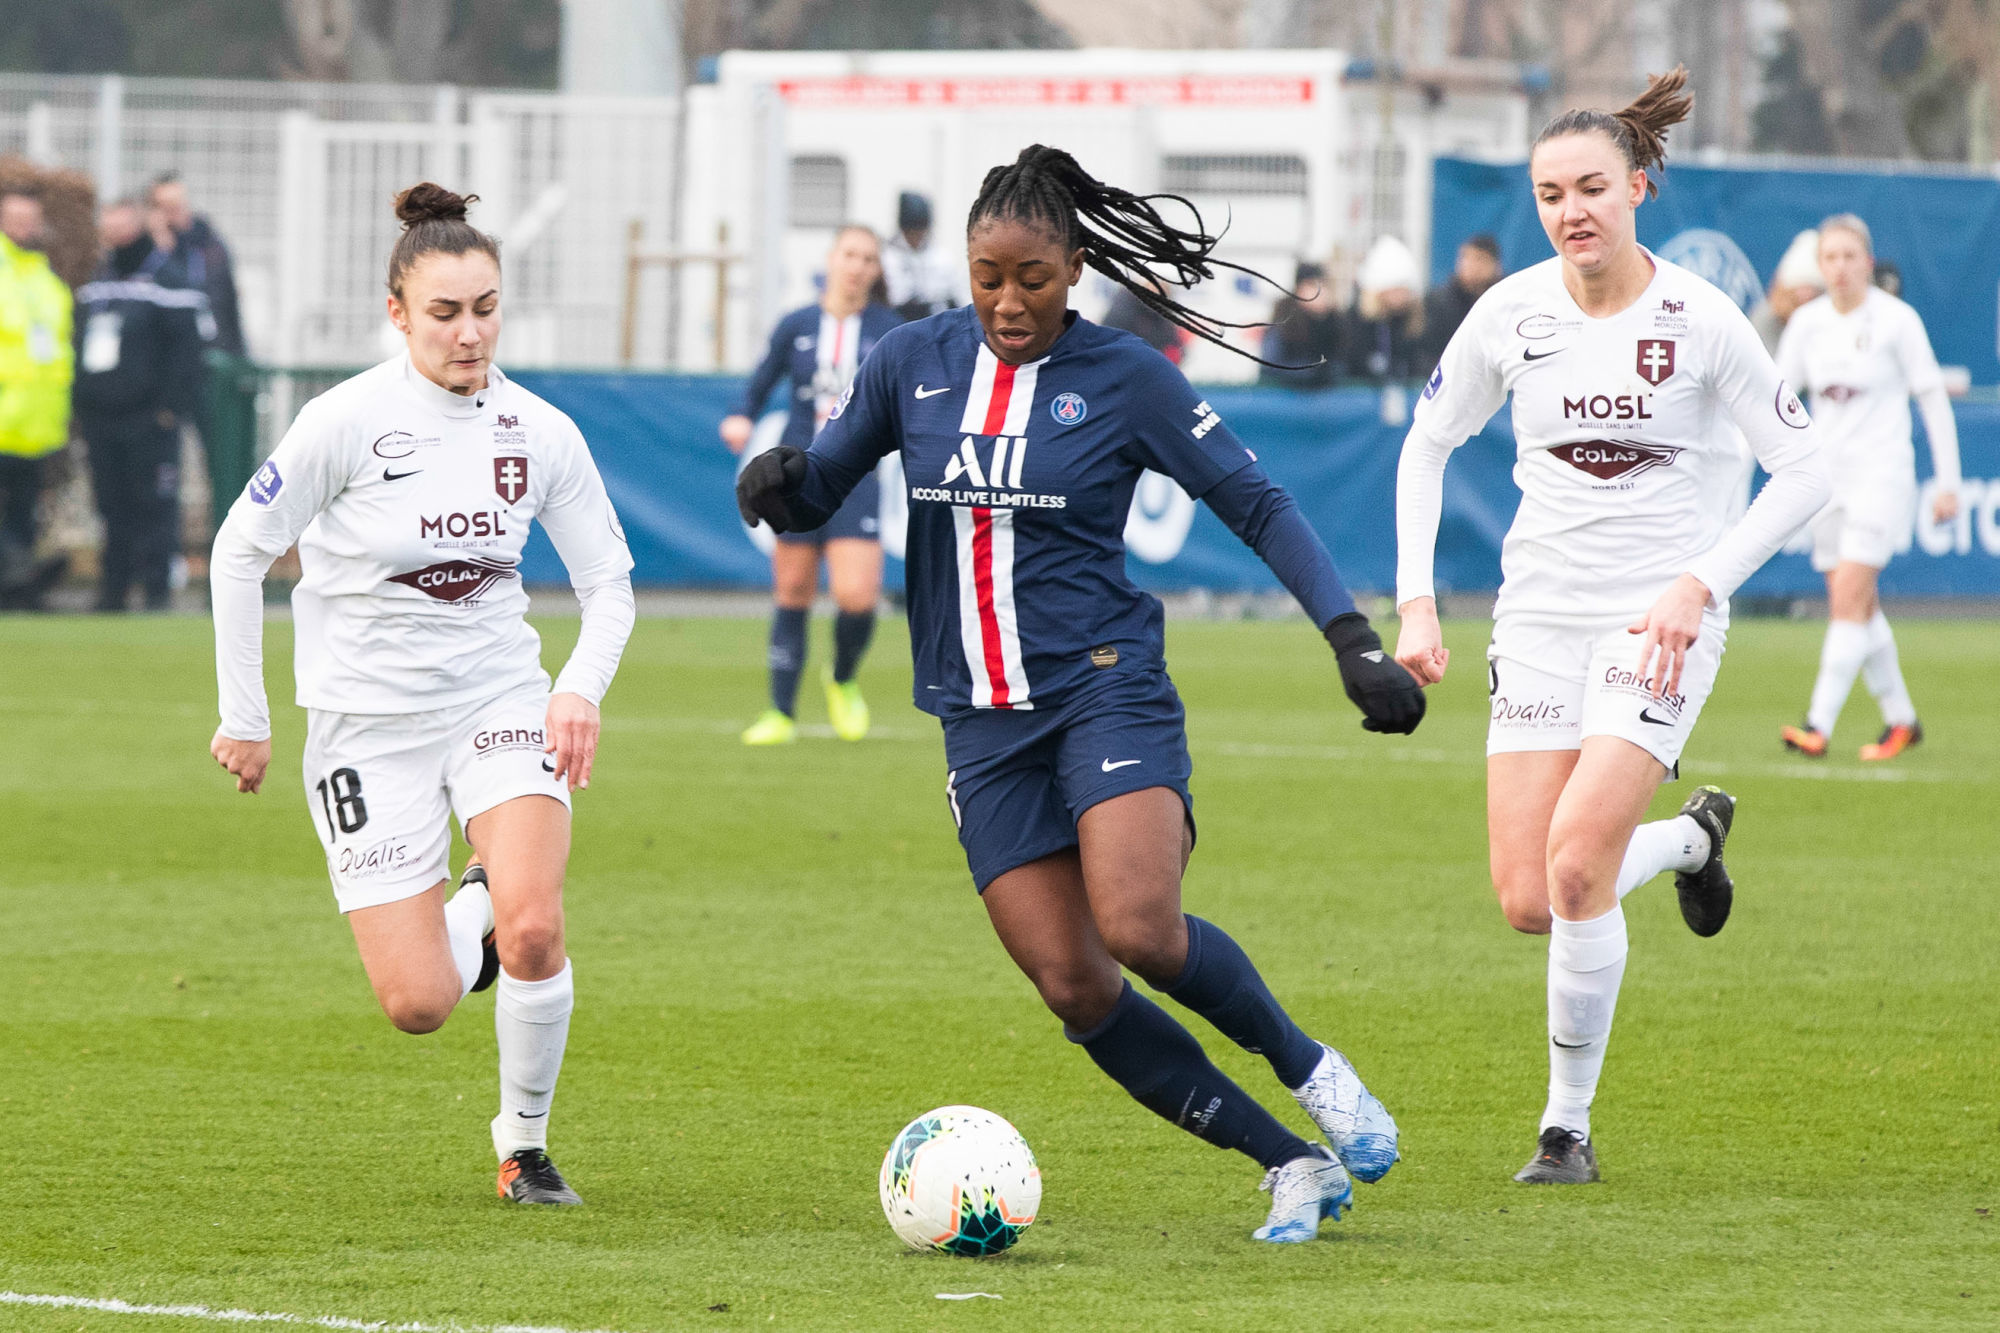 Celia RIGAUD of Metz FC and Kadidiatou DIANI of PSG FC during the Division 1 match between Paris and Metz at Stade Jean Bouin on January 25, 2020 in Paris, France. (Photo by Michel Brisset/Icon Sport) - Kadidiatou DIANI - Celia RIGAUD - Stade Jean Bouin - Paris (France)